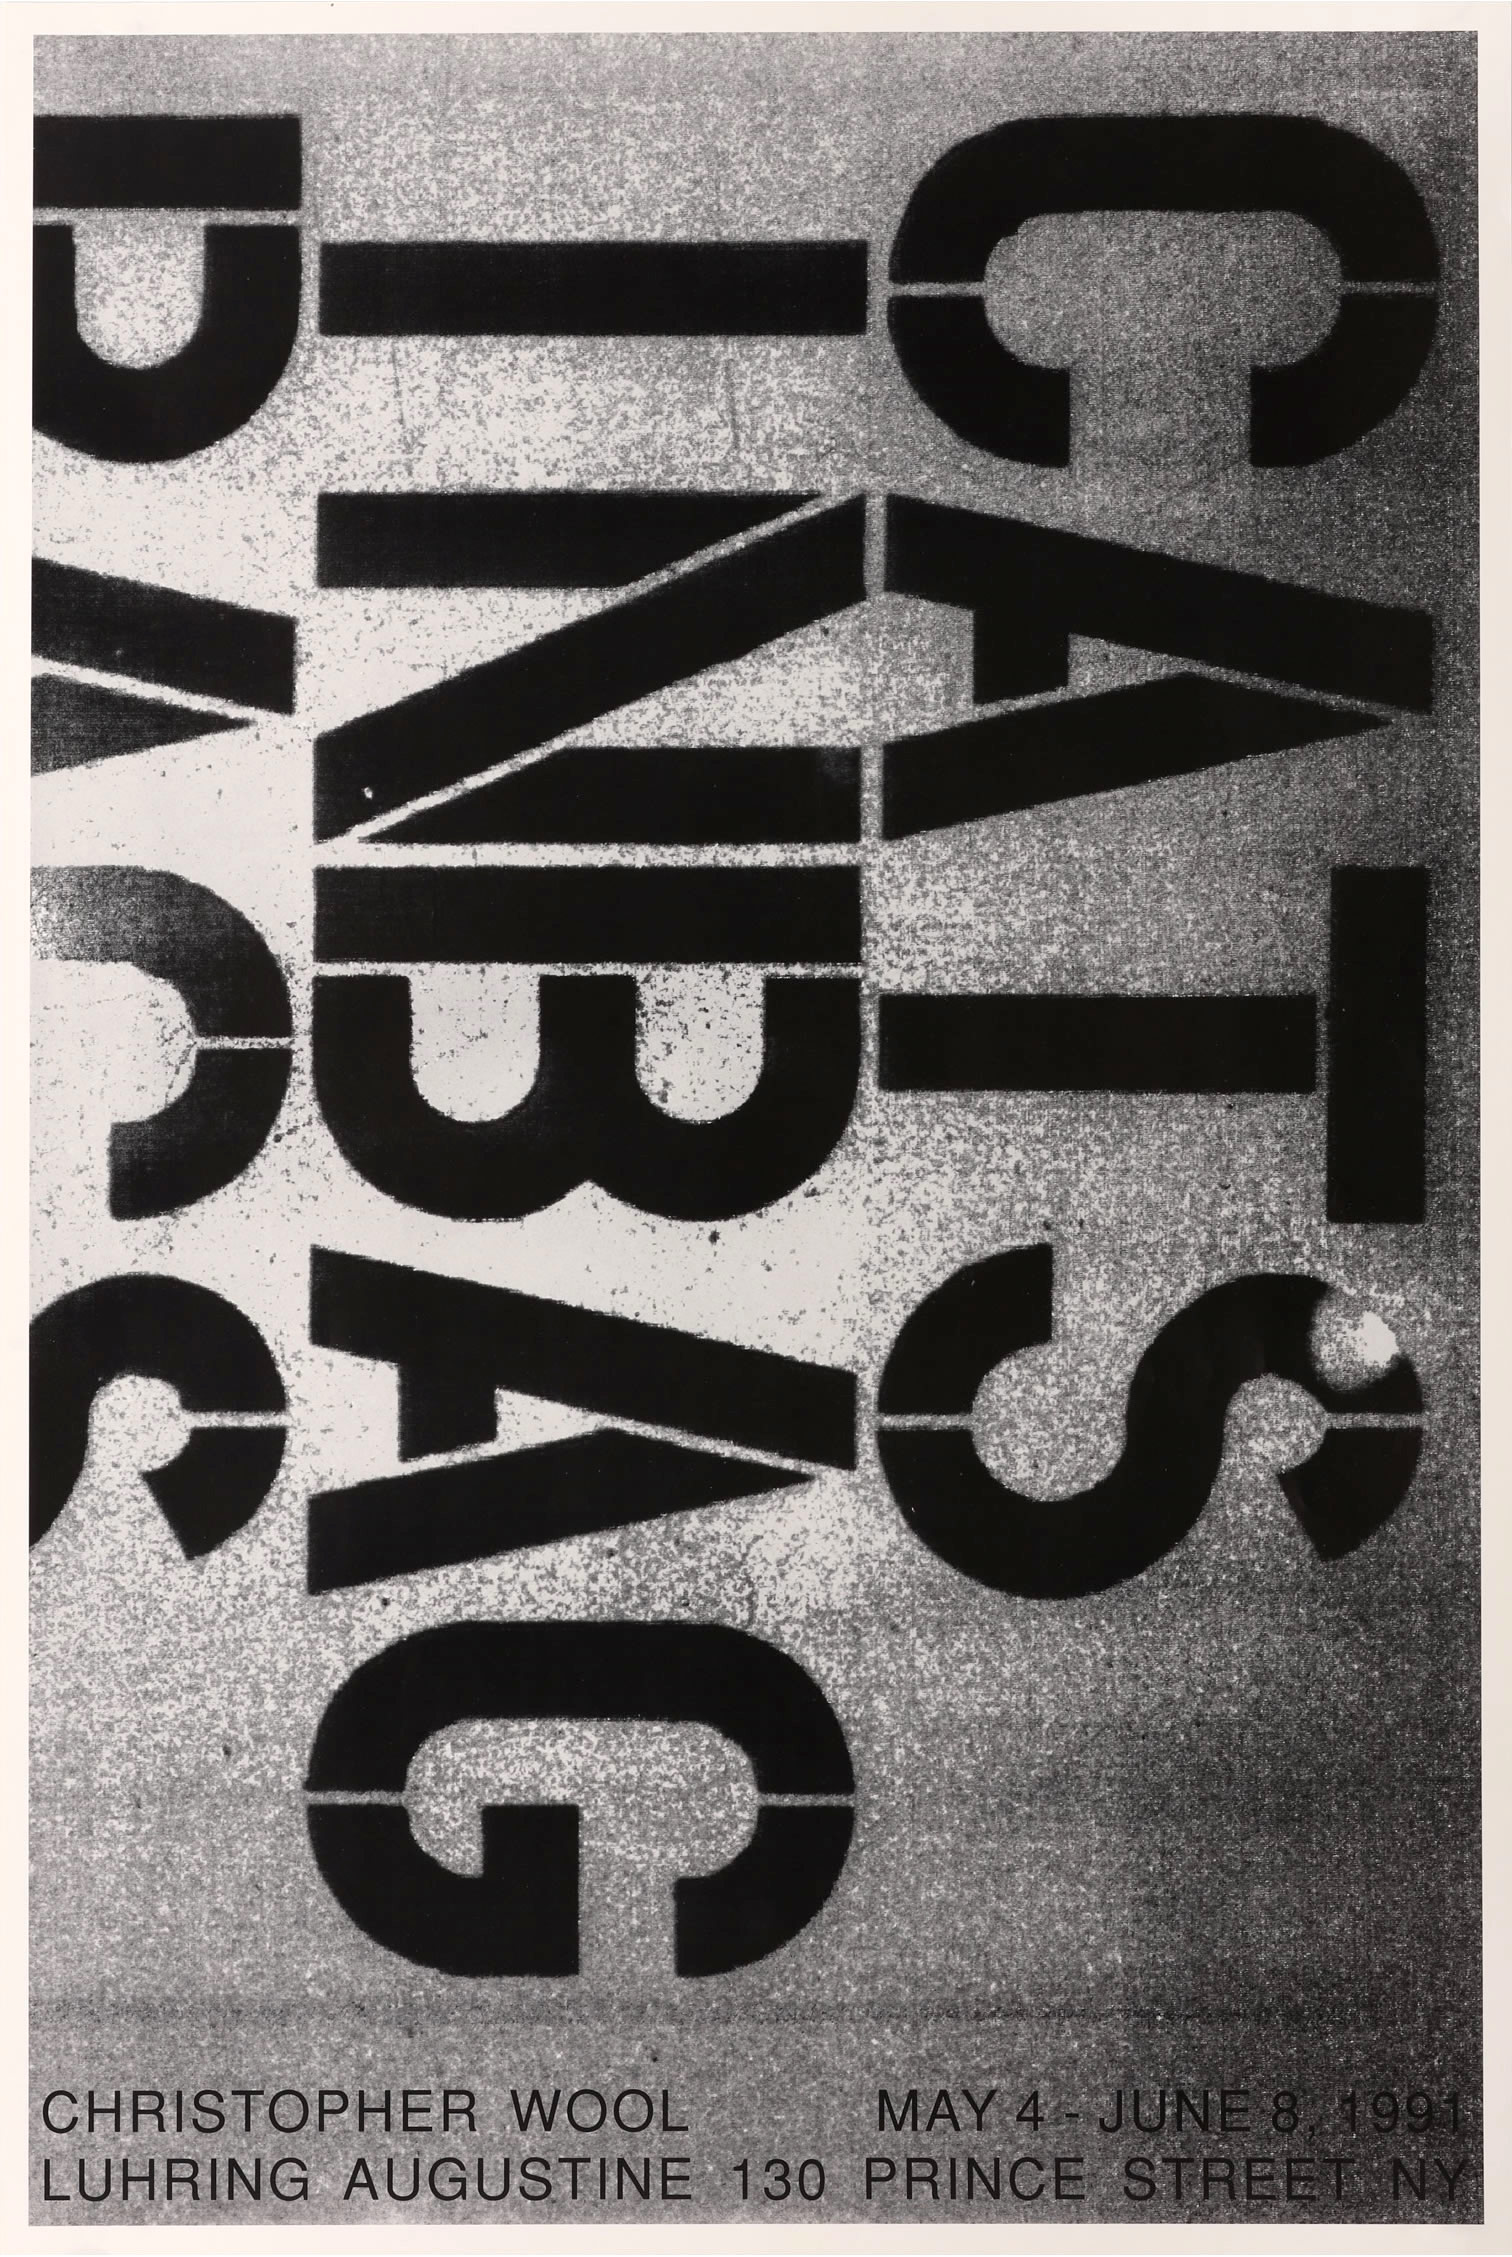 Christopher Wool: Luhring Augustine Gallery, New York. 1991.